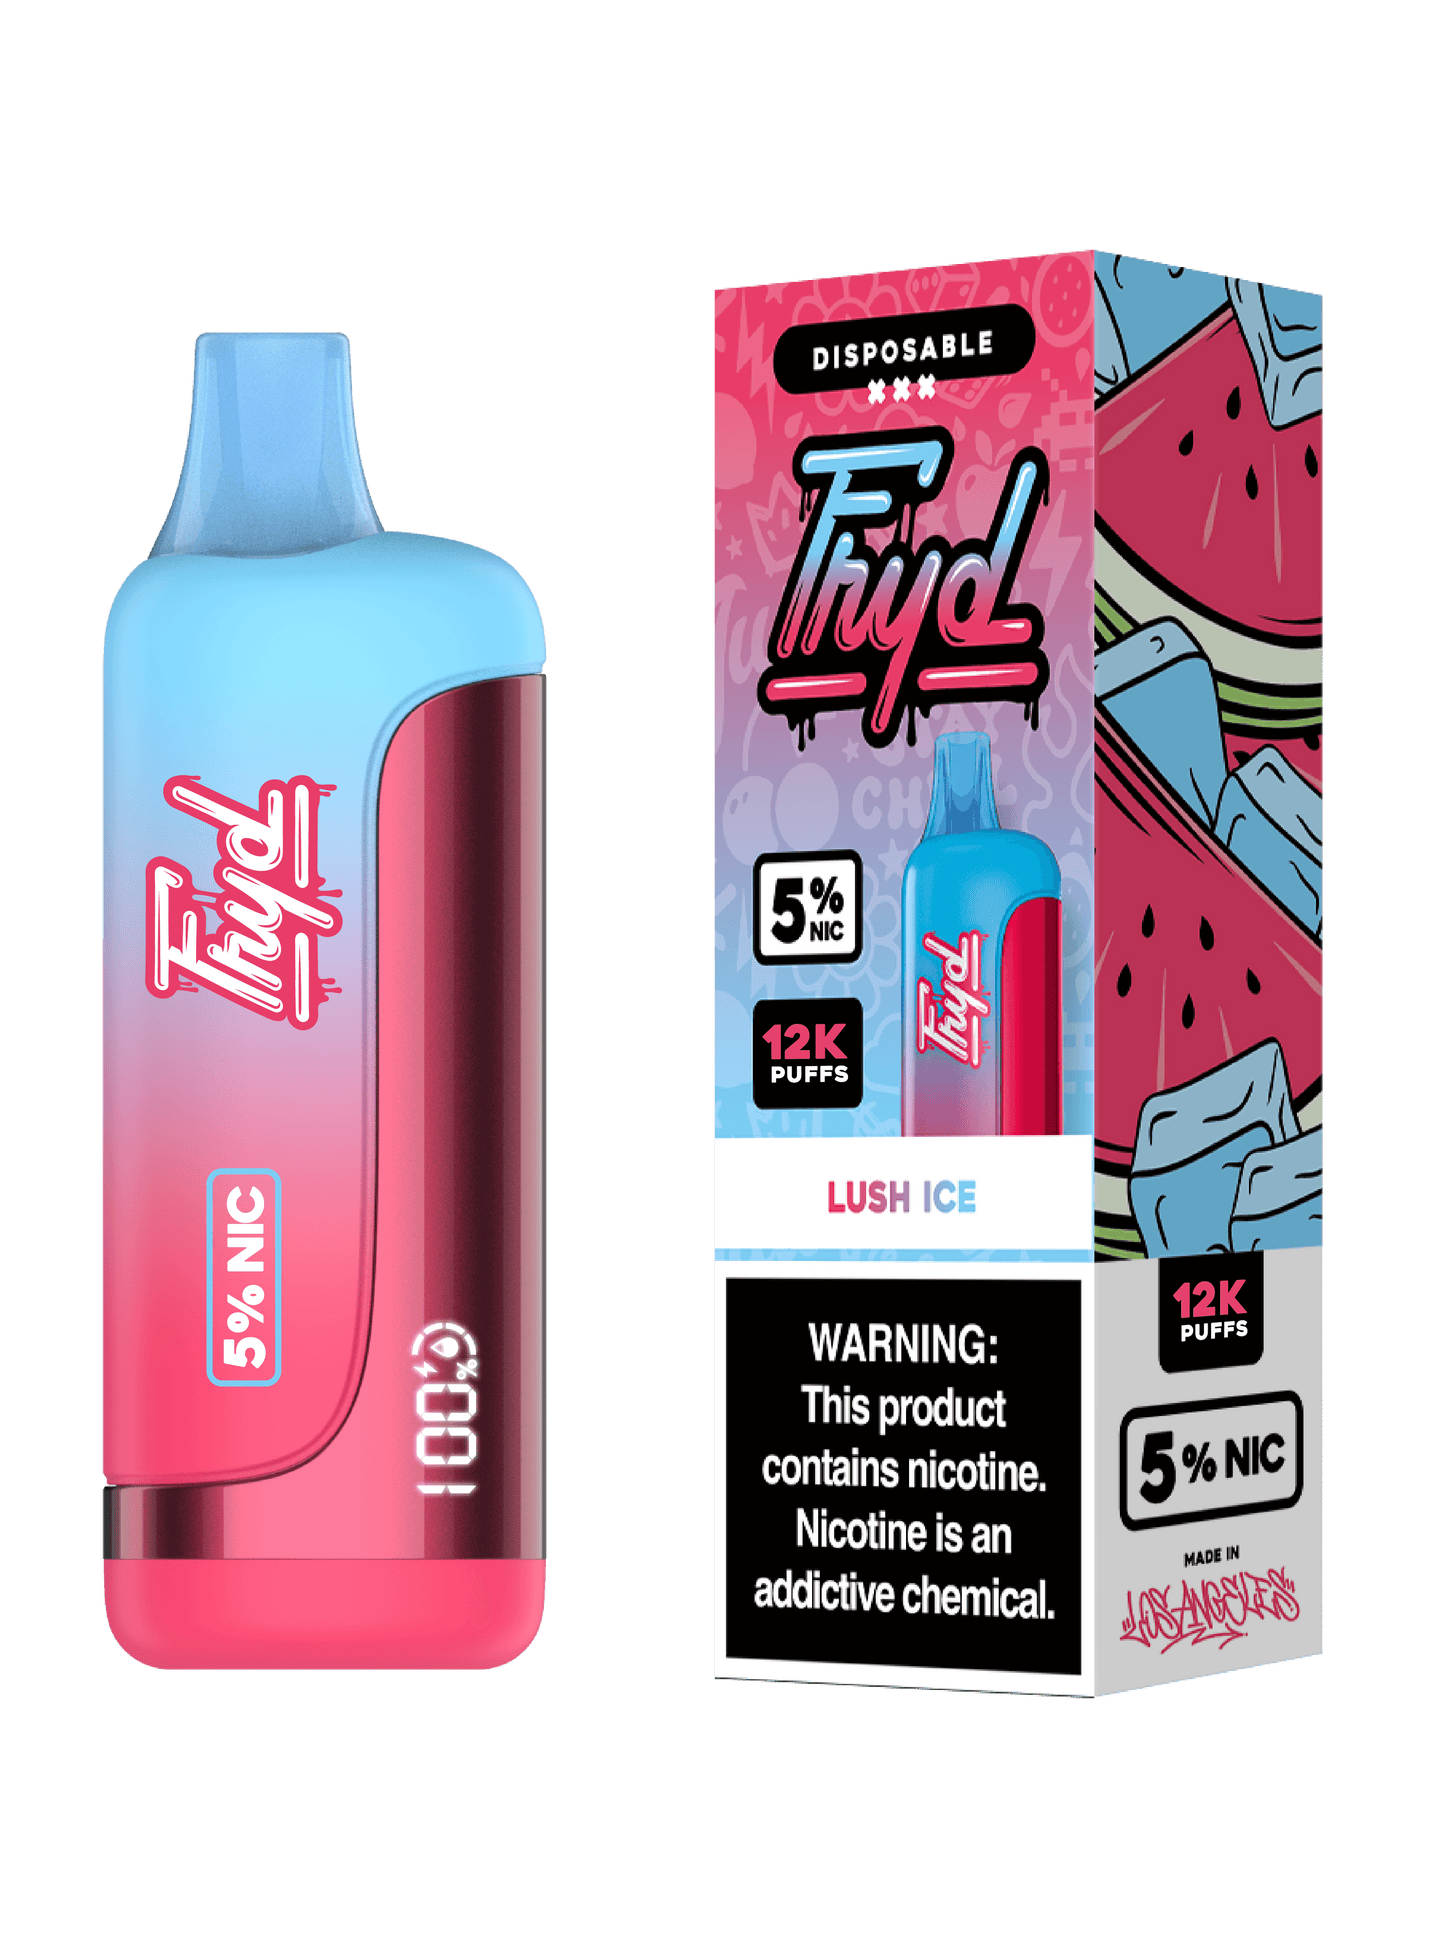 FRYD Disposable 12,0000 Puffs (17mL) 50mg Lush Ice with packaging